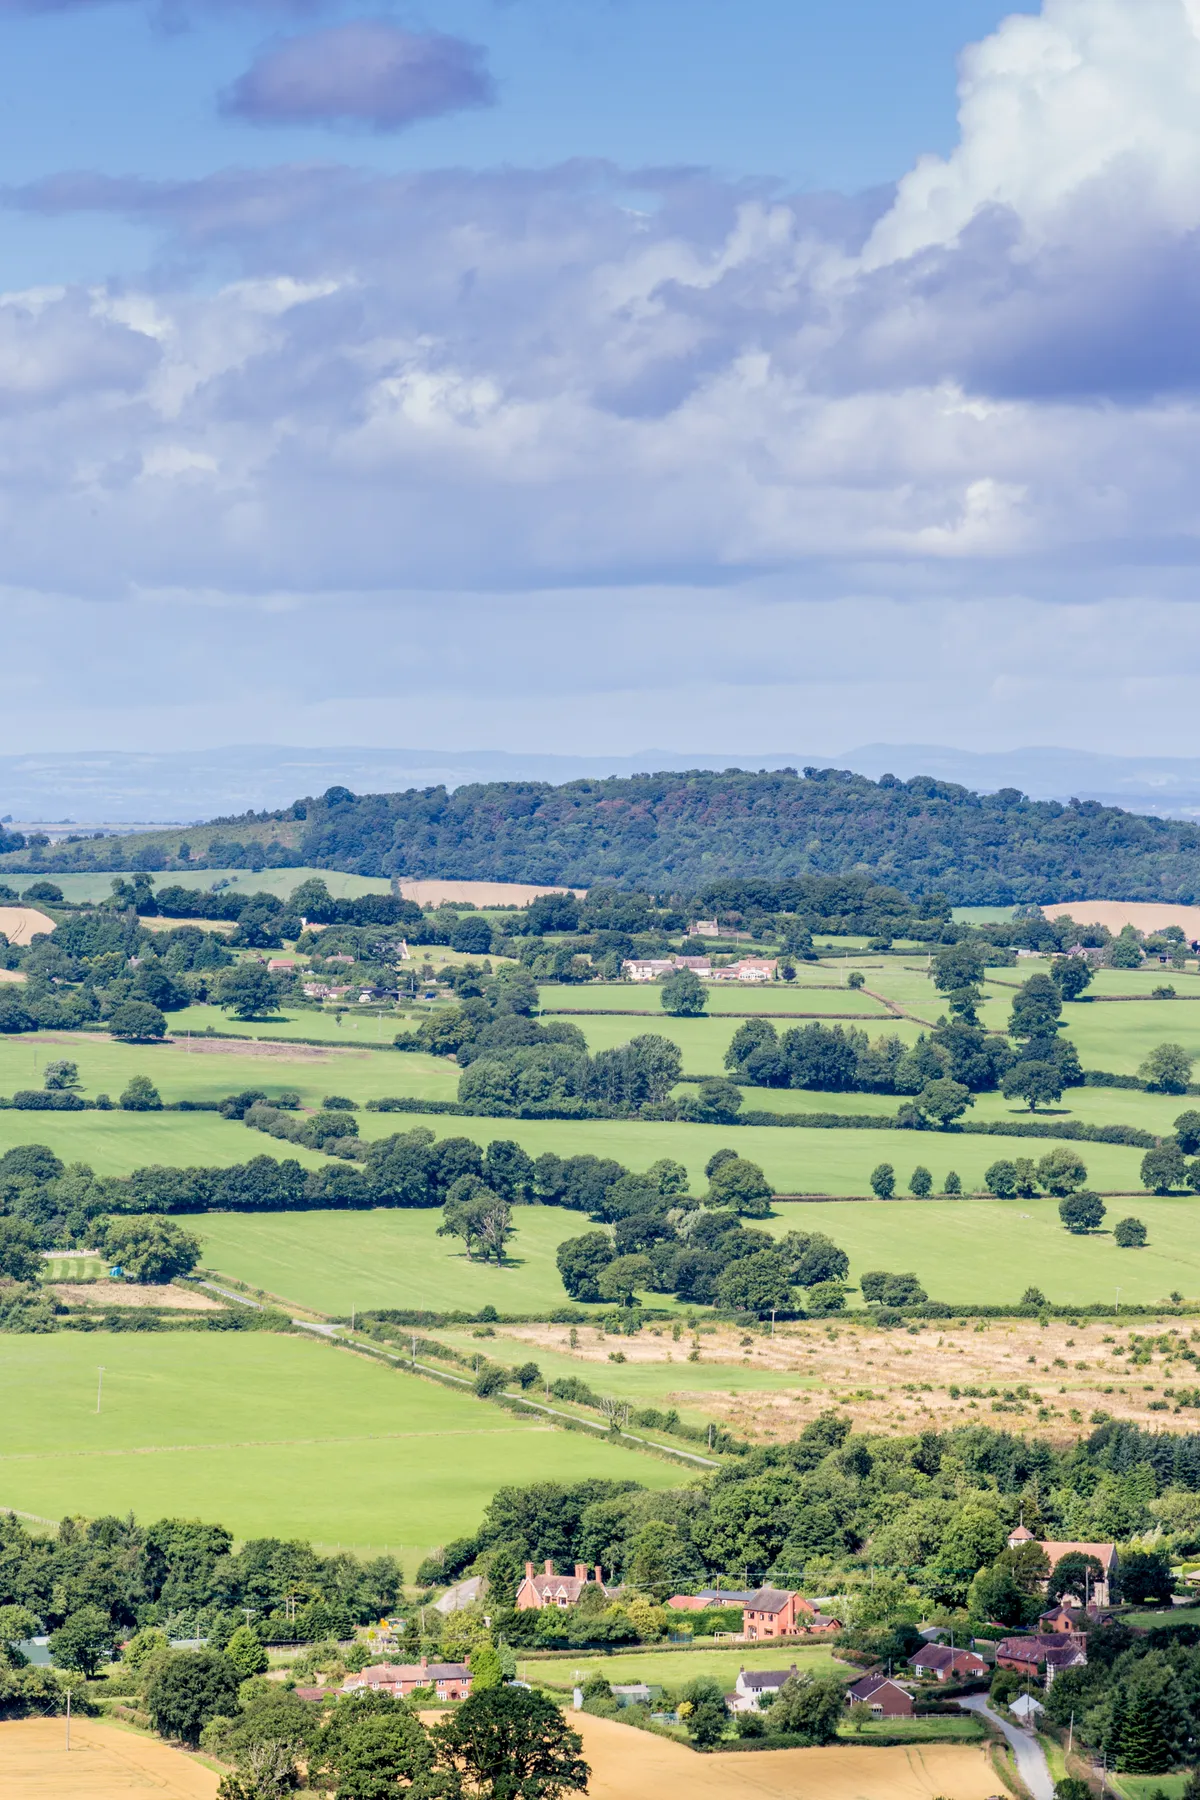 View of the shropshire countryside from Wenlock Edge